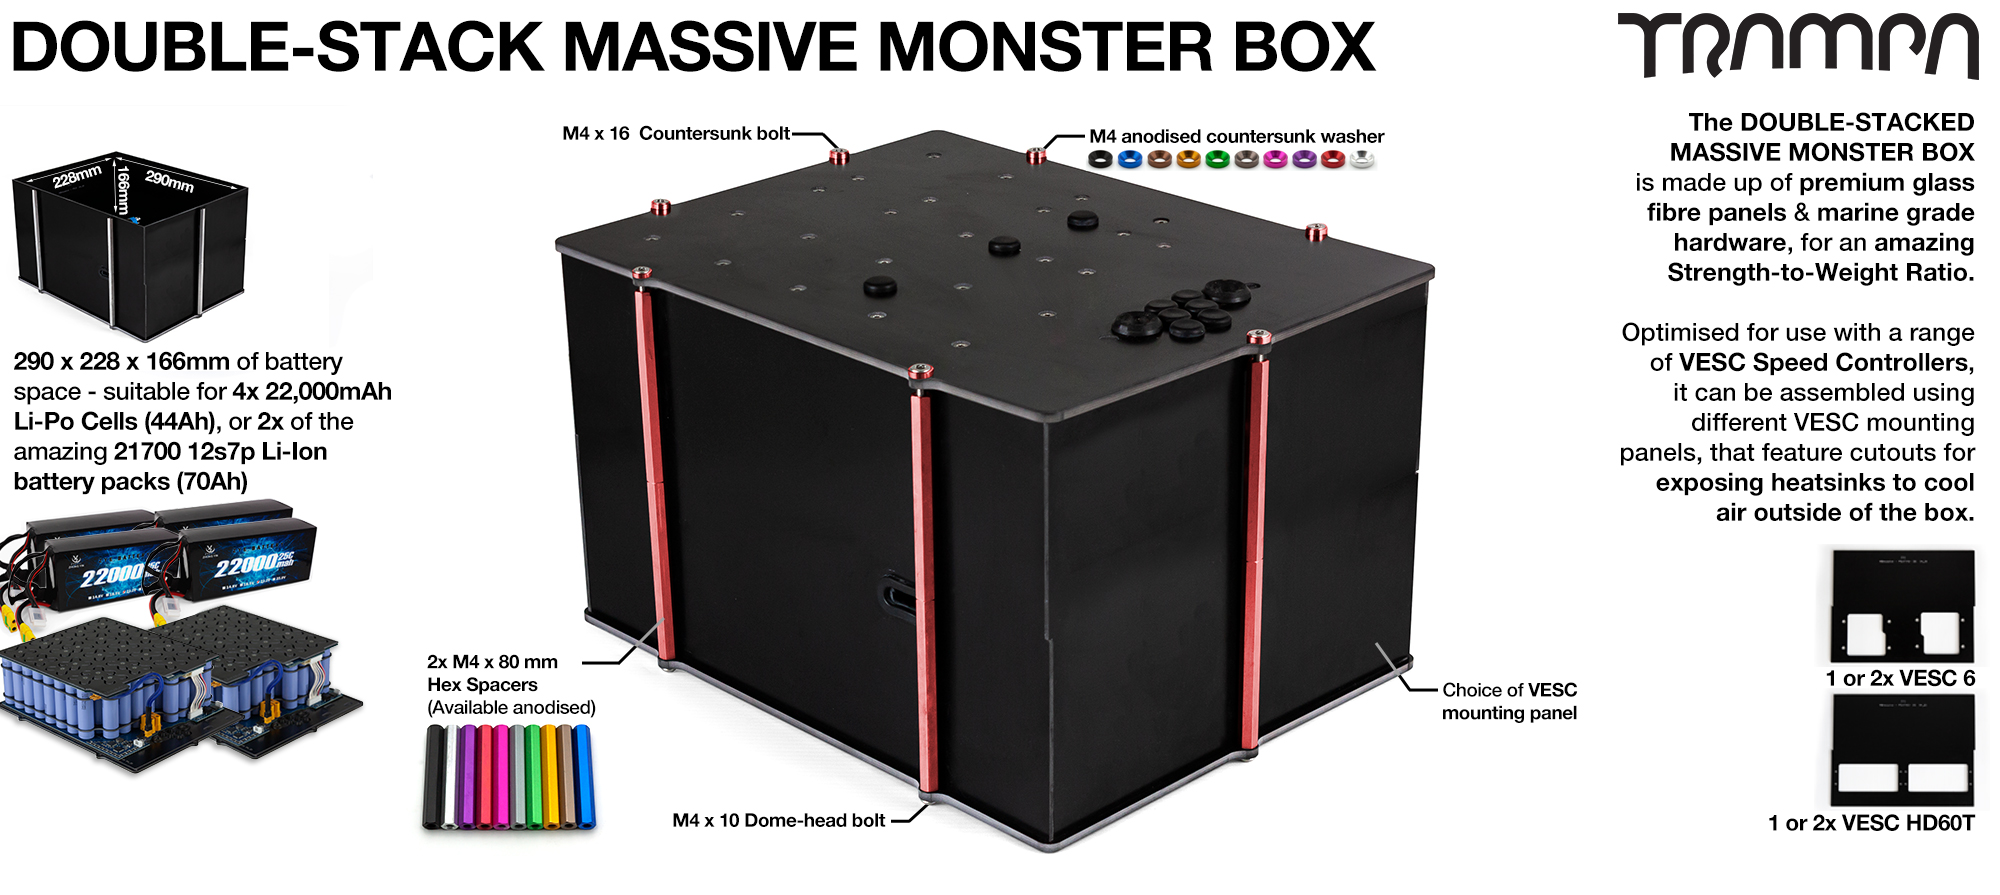 2WD DOUBLE STACK MASSIVE MONSTER Box with NO VESC Mounting Panel 